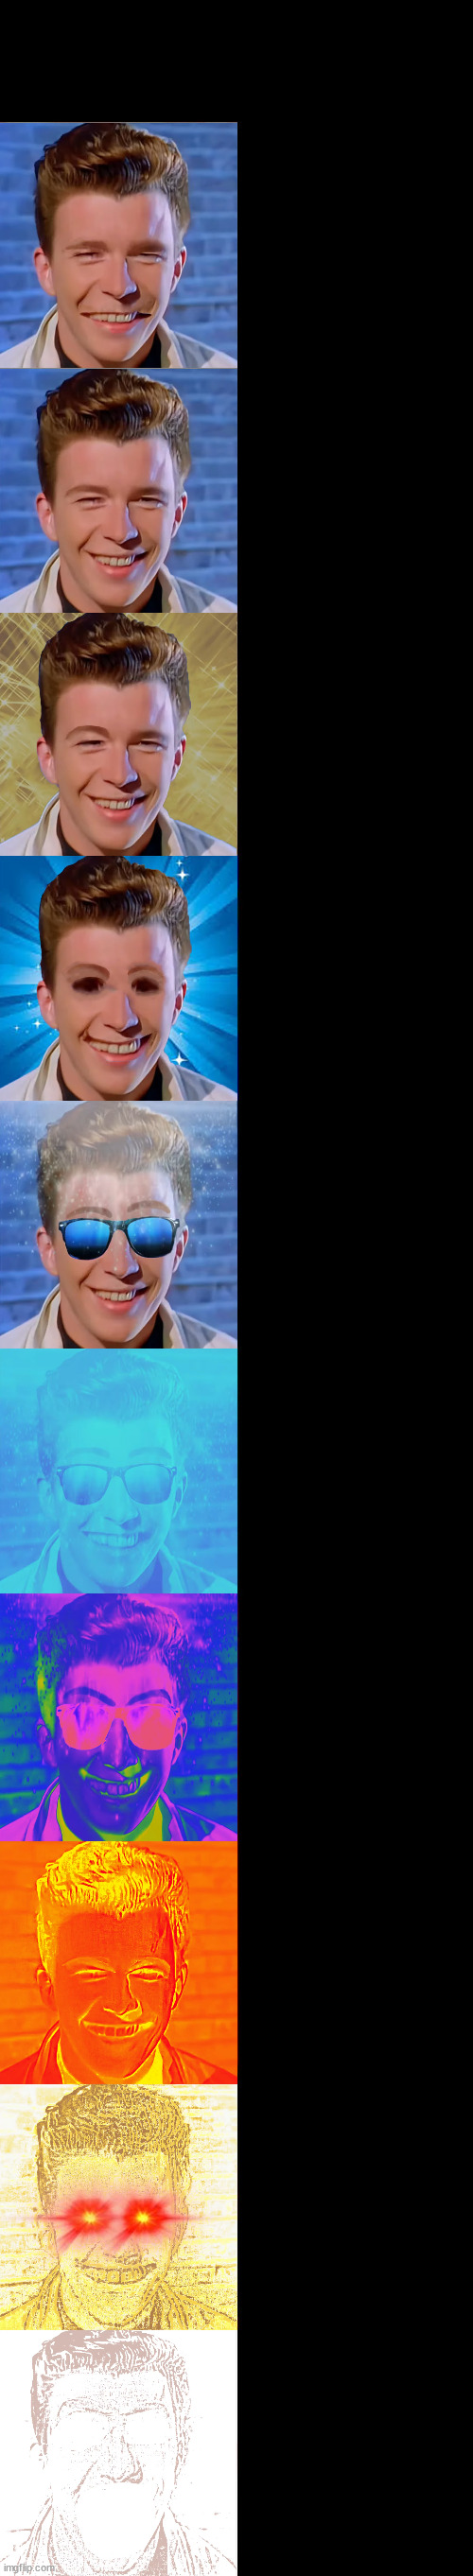 Rick Astley Becoming Canny Blank Meme Template